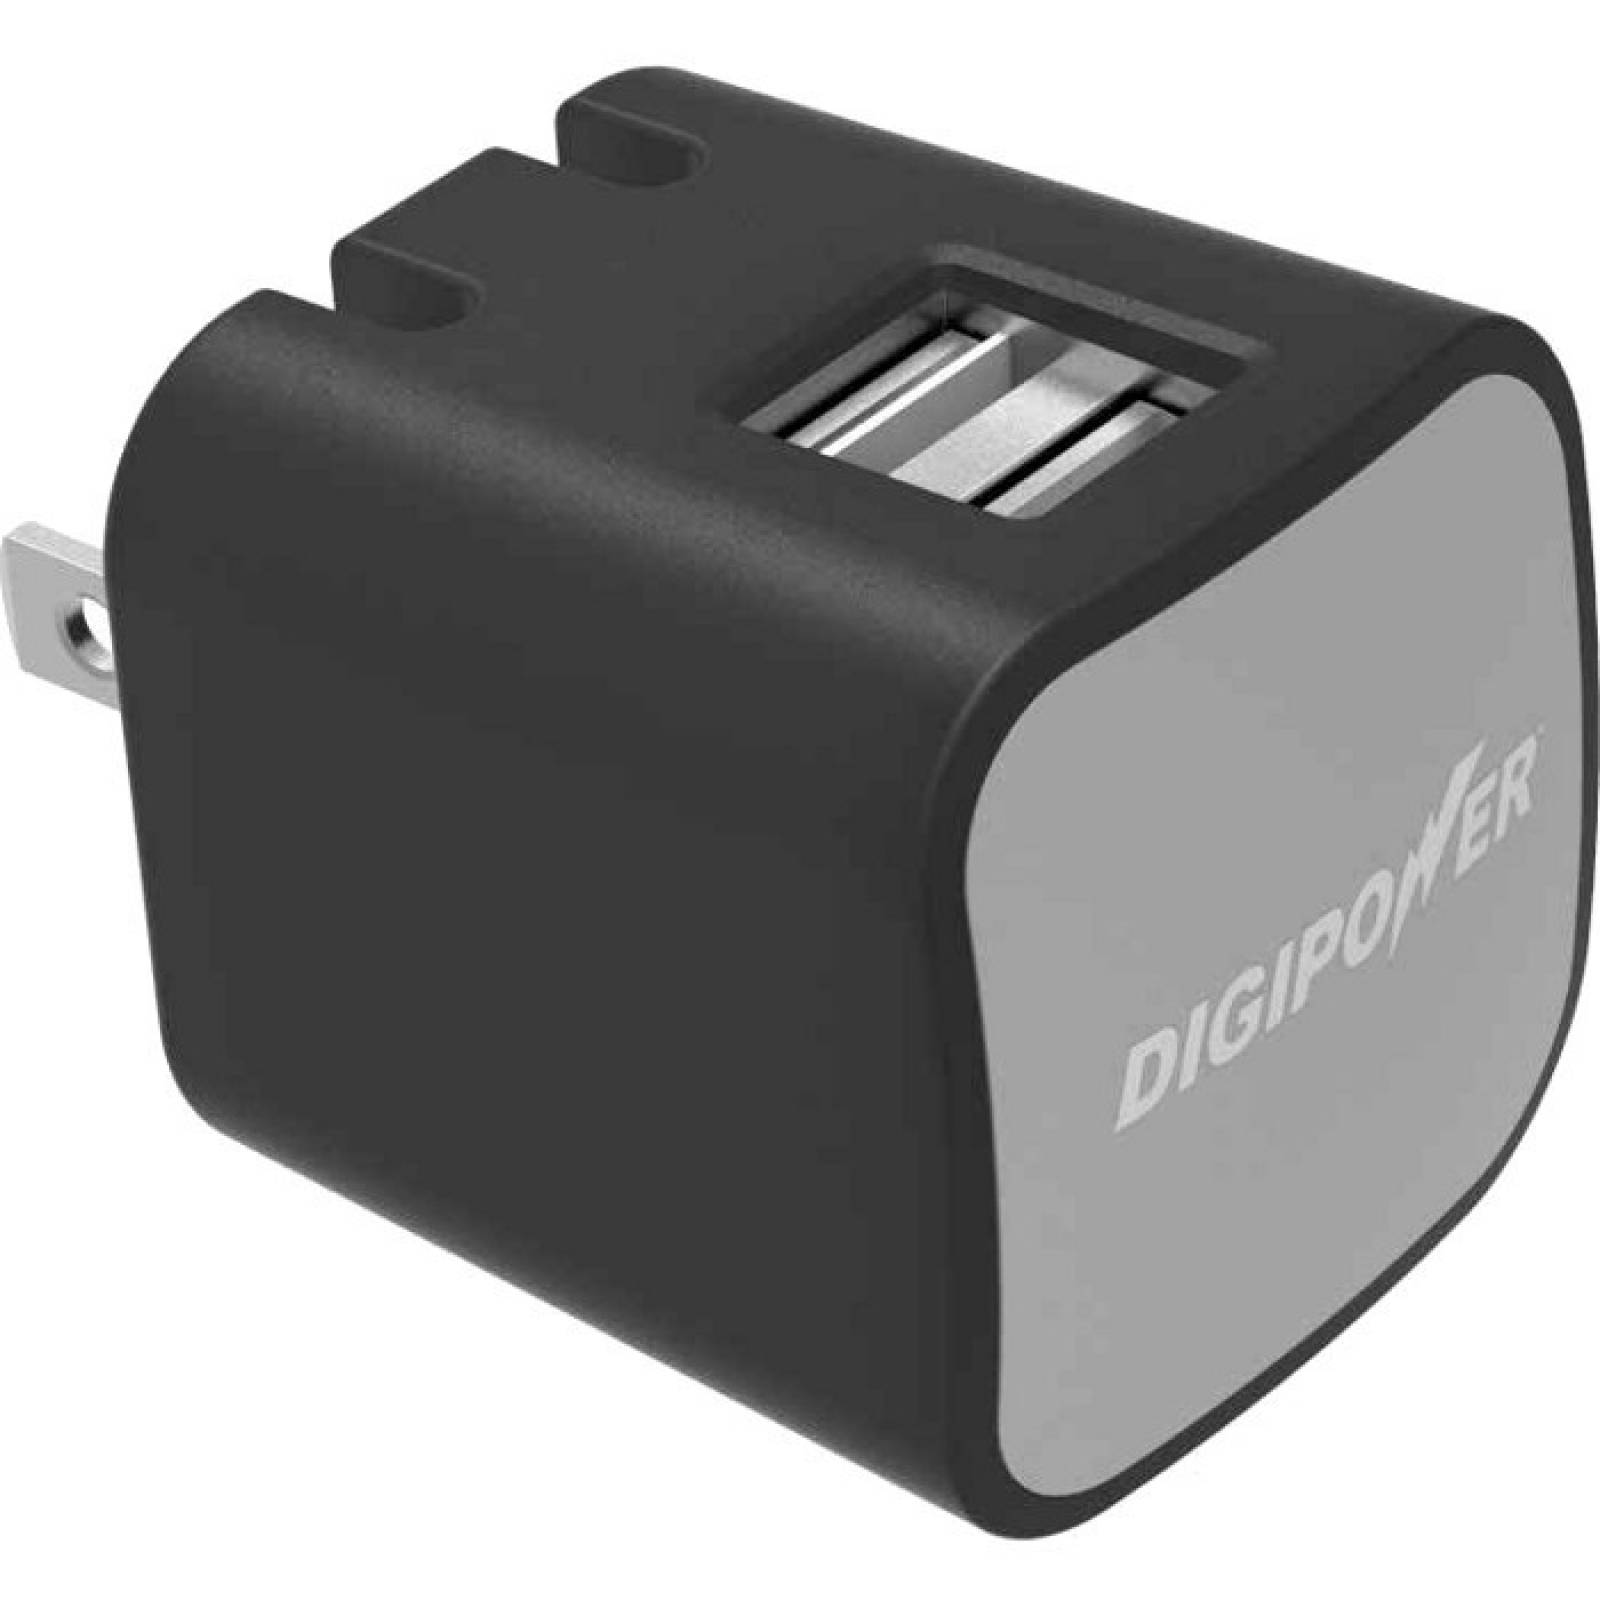 DigiPower Dual USB Wall Charger ISAC2D